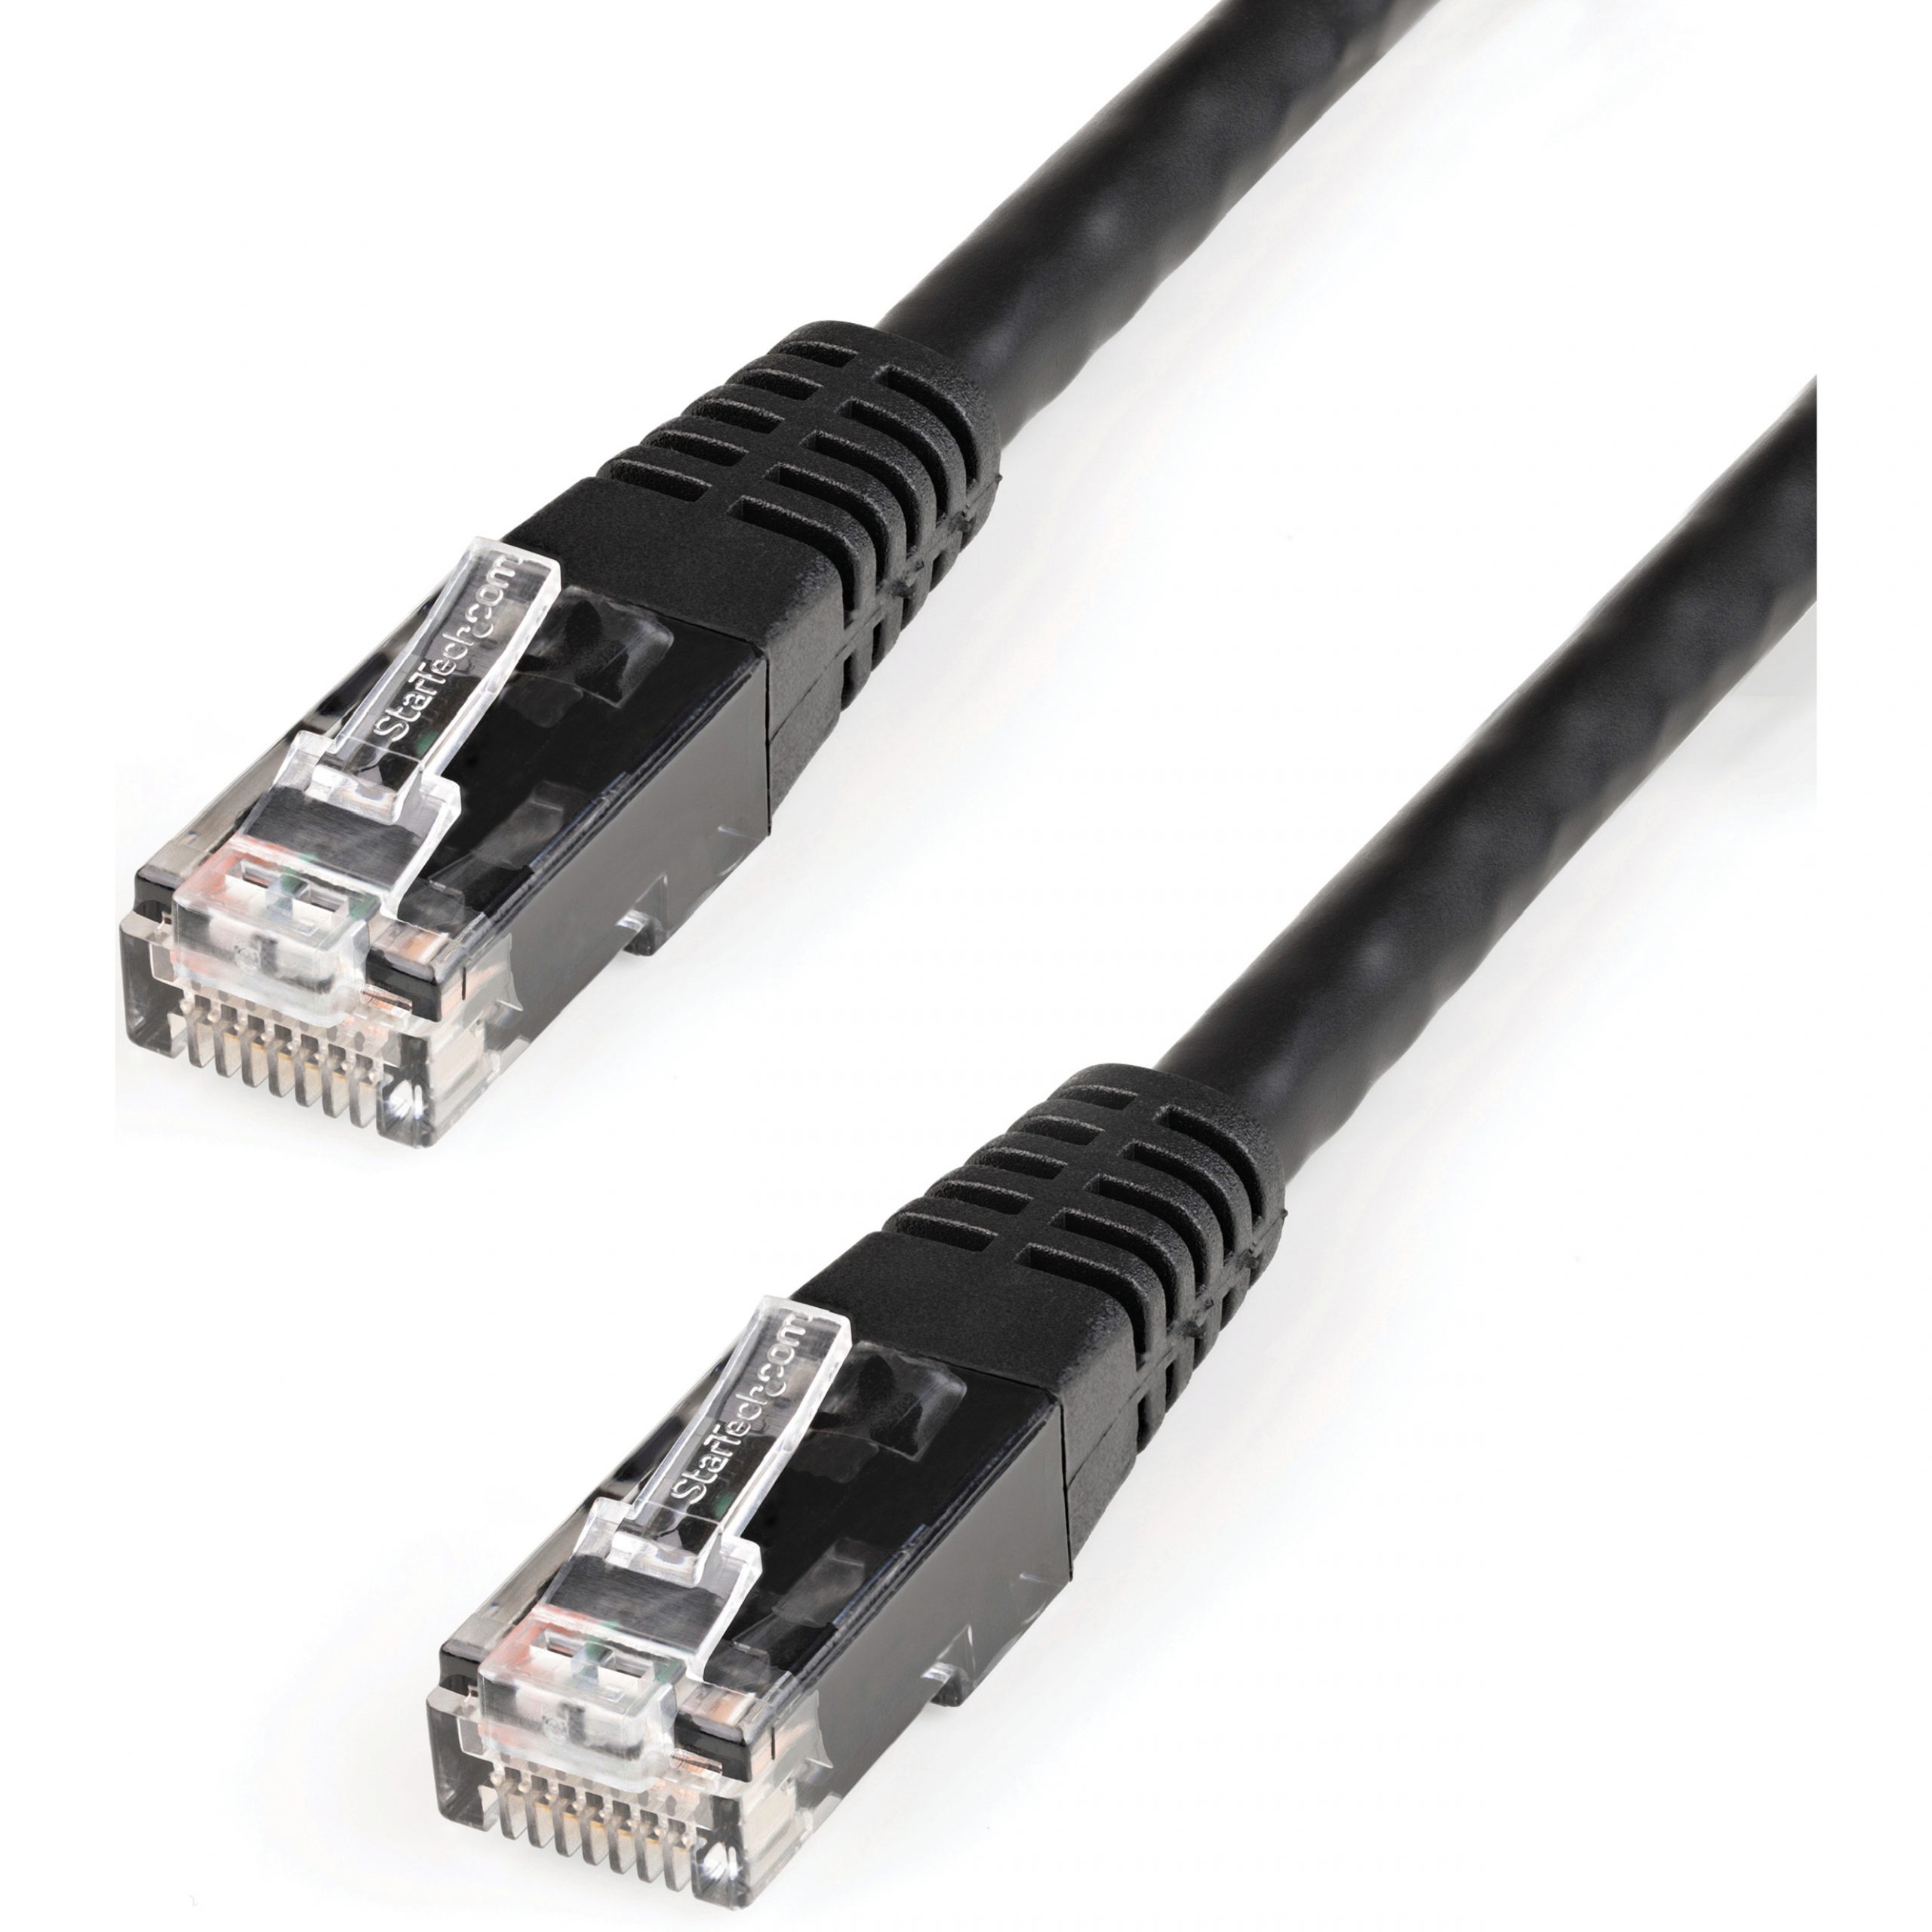 Startech .com 100ft CAT6 Ethernet CableBlack Molded Gigabit100W PoE UTP 650MHzCategory 6 Patch Cord UL Certified Wiring/TIA100ft… C6PATCH100BK